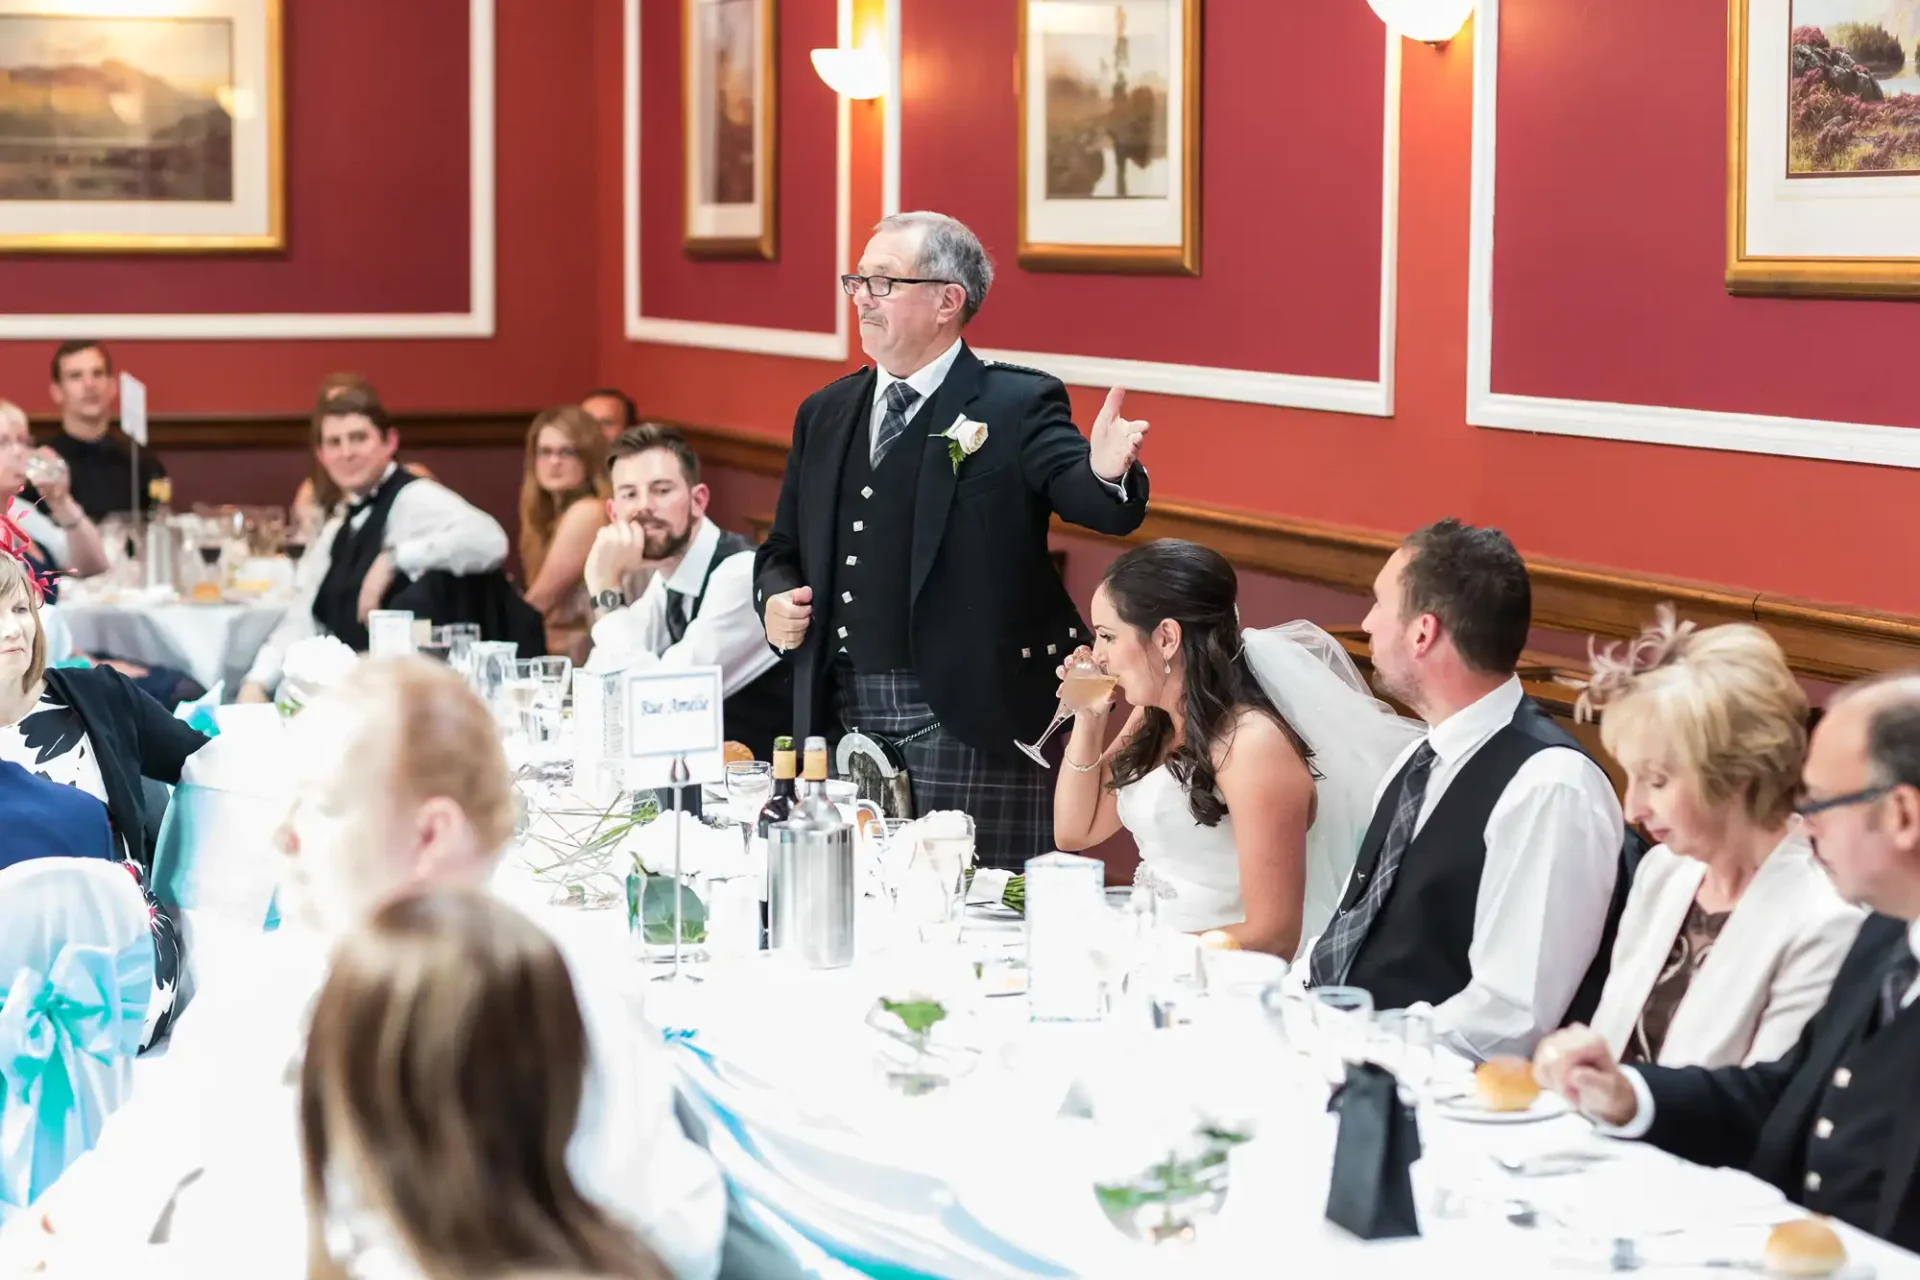 A man in a suit speaking to a group of people at a wedding reception.